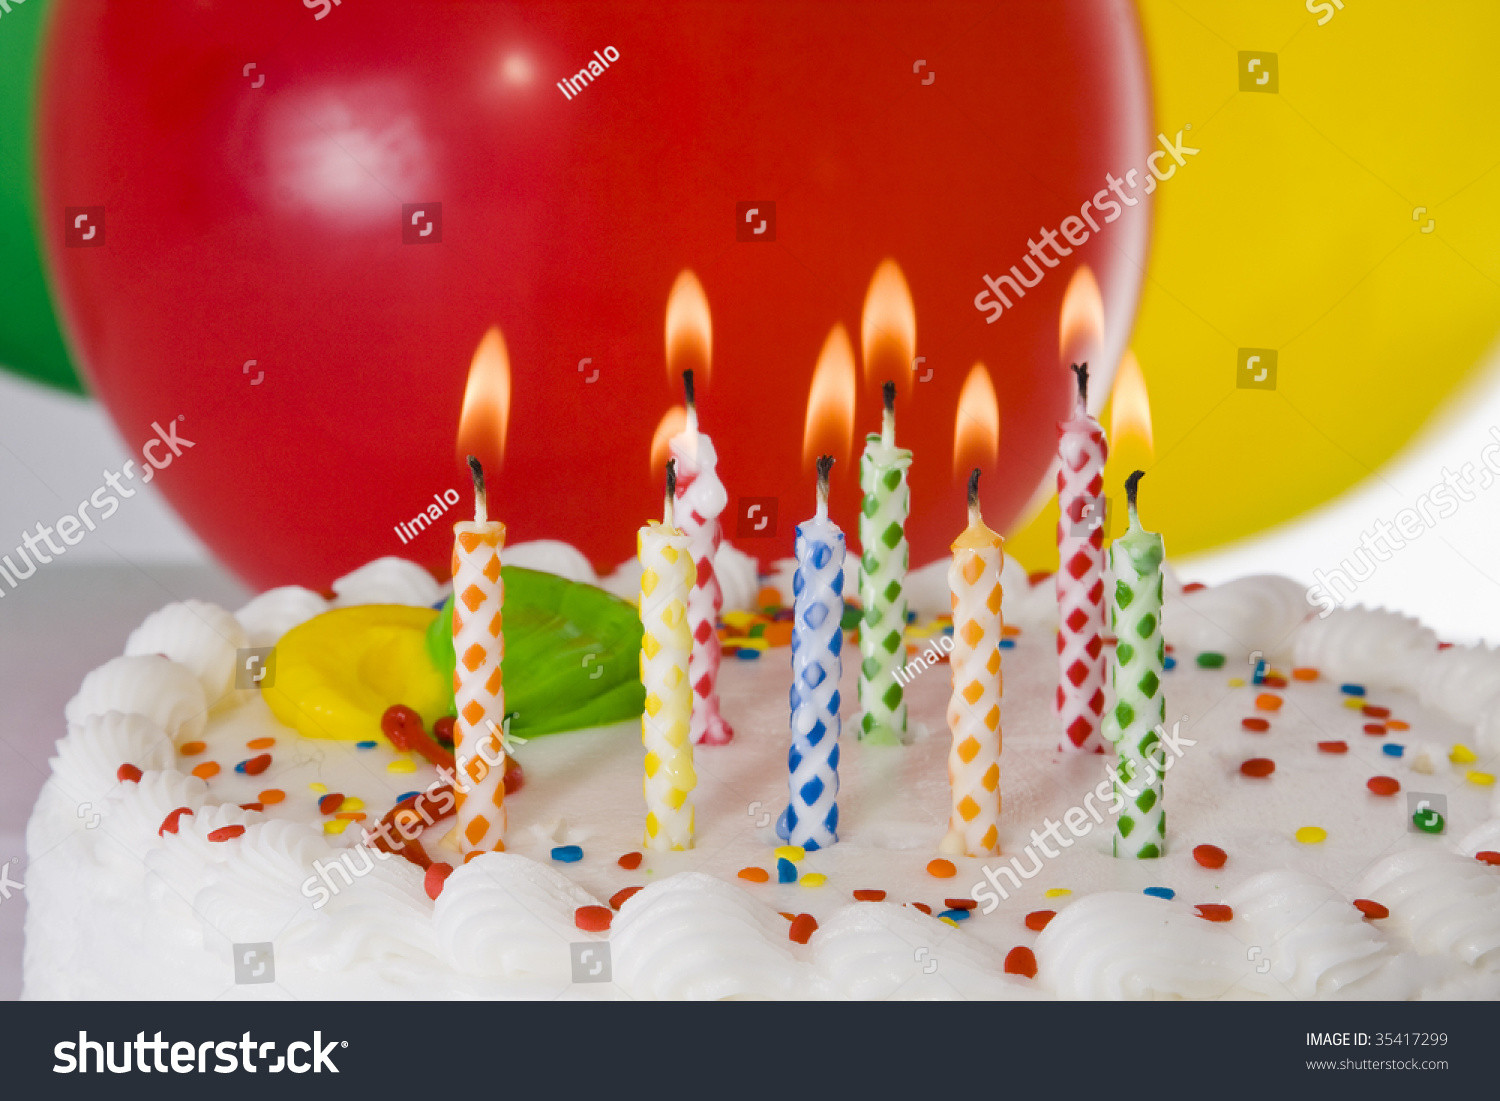 Birthday Cake With Candles And Balloons
 Birthday Cake With Lighted Candles And Balloons Stock